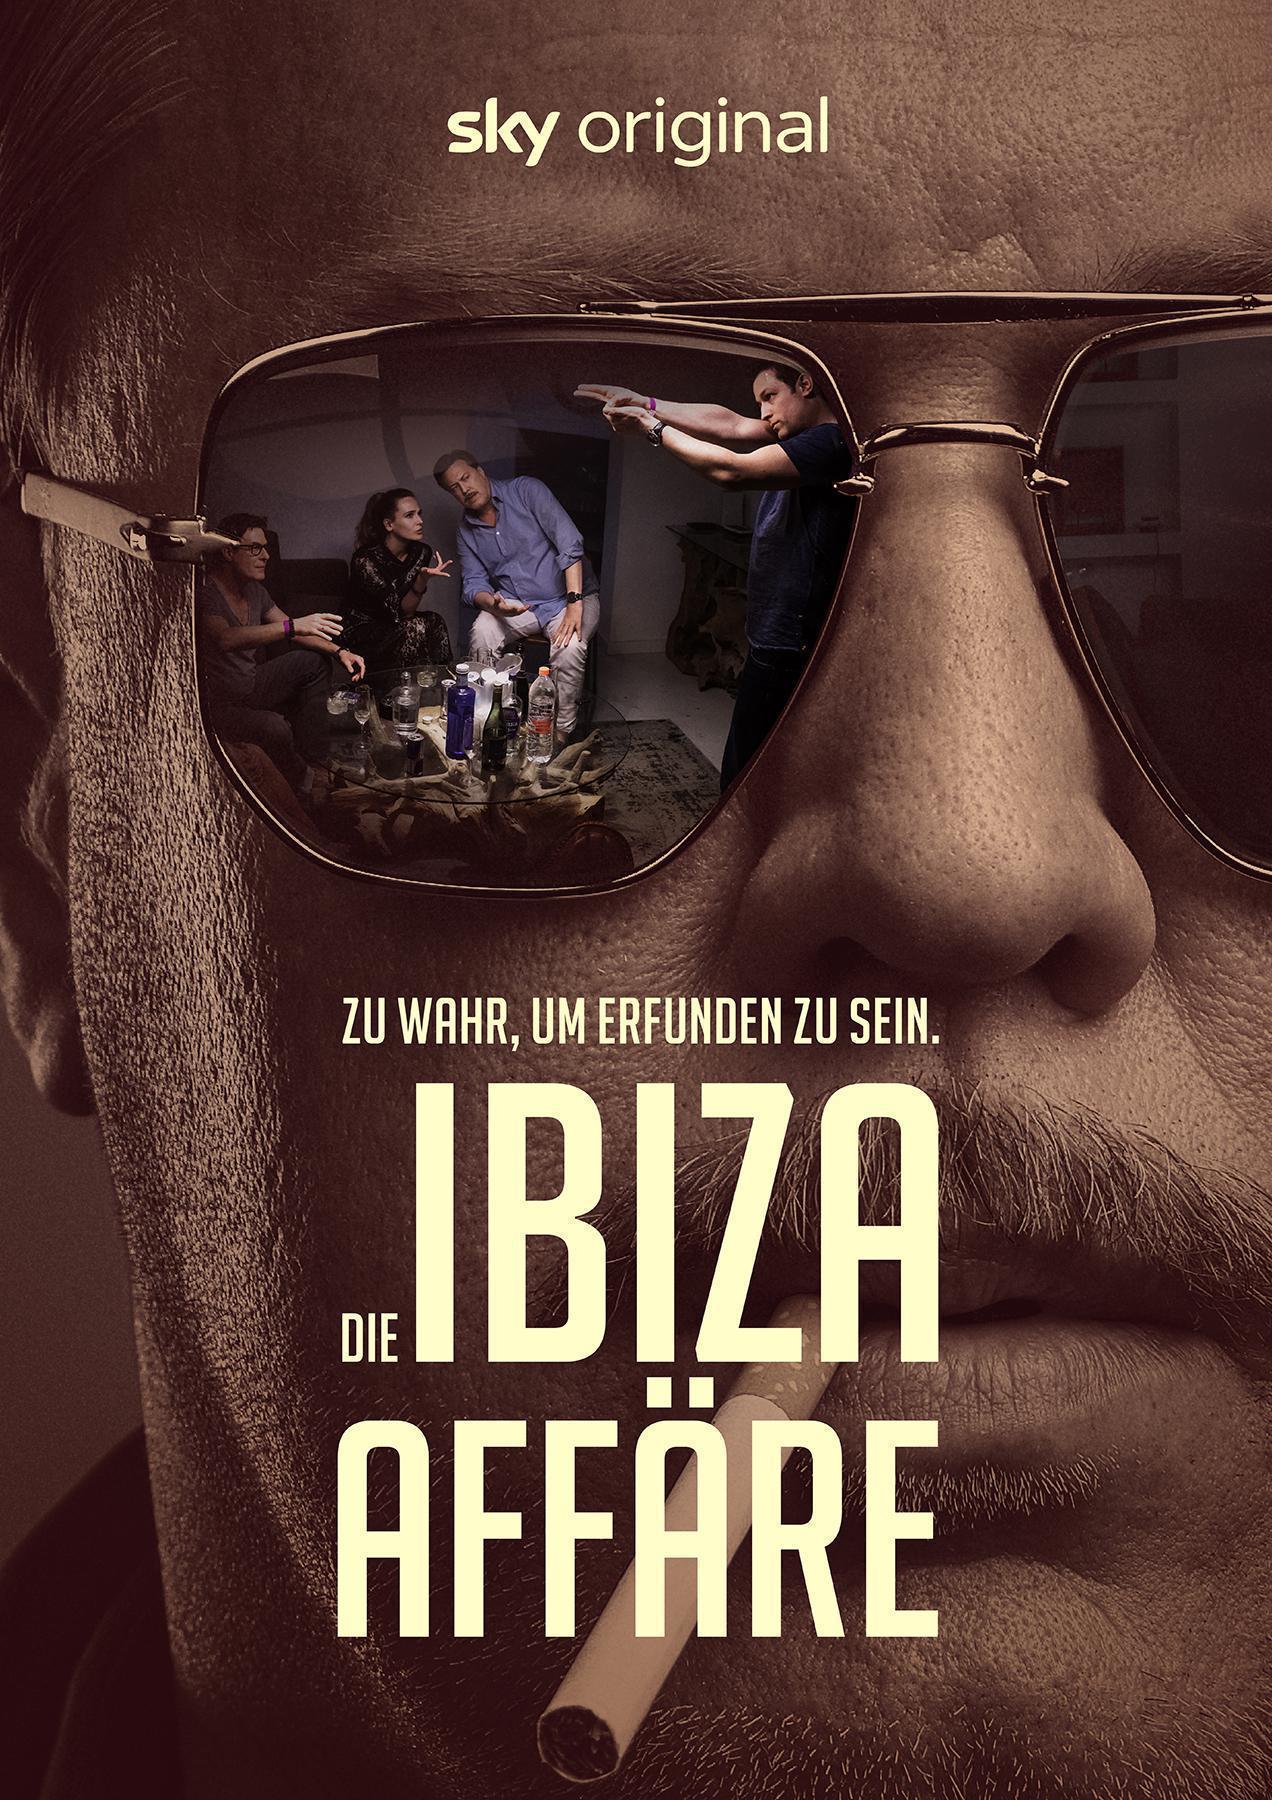 TV ratings for The Ibiza Affair in Russia. Sky 1 TV series